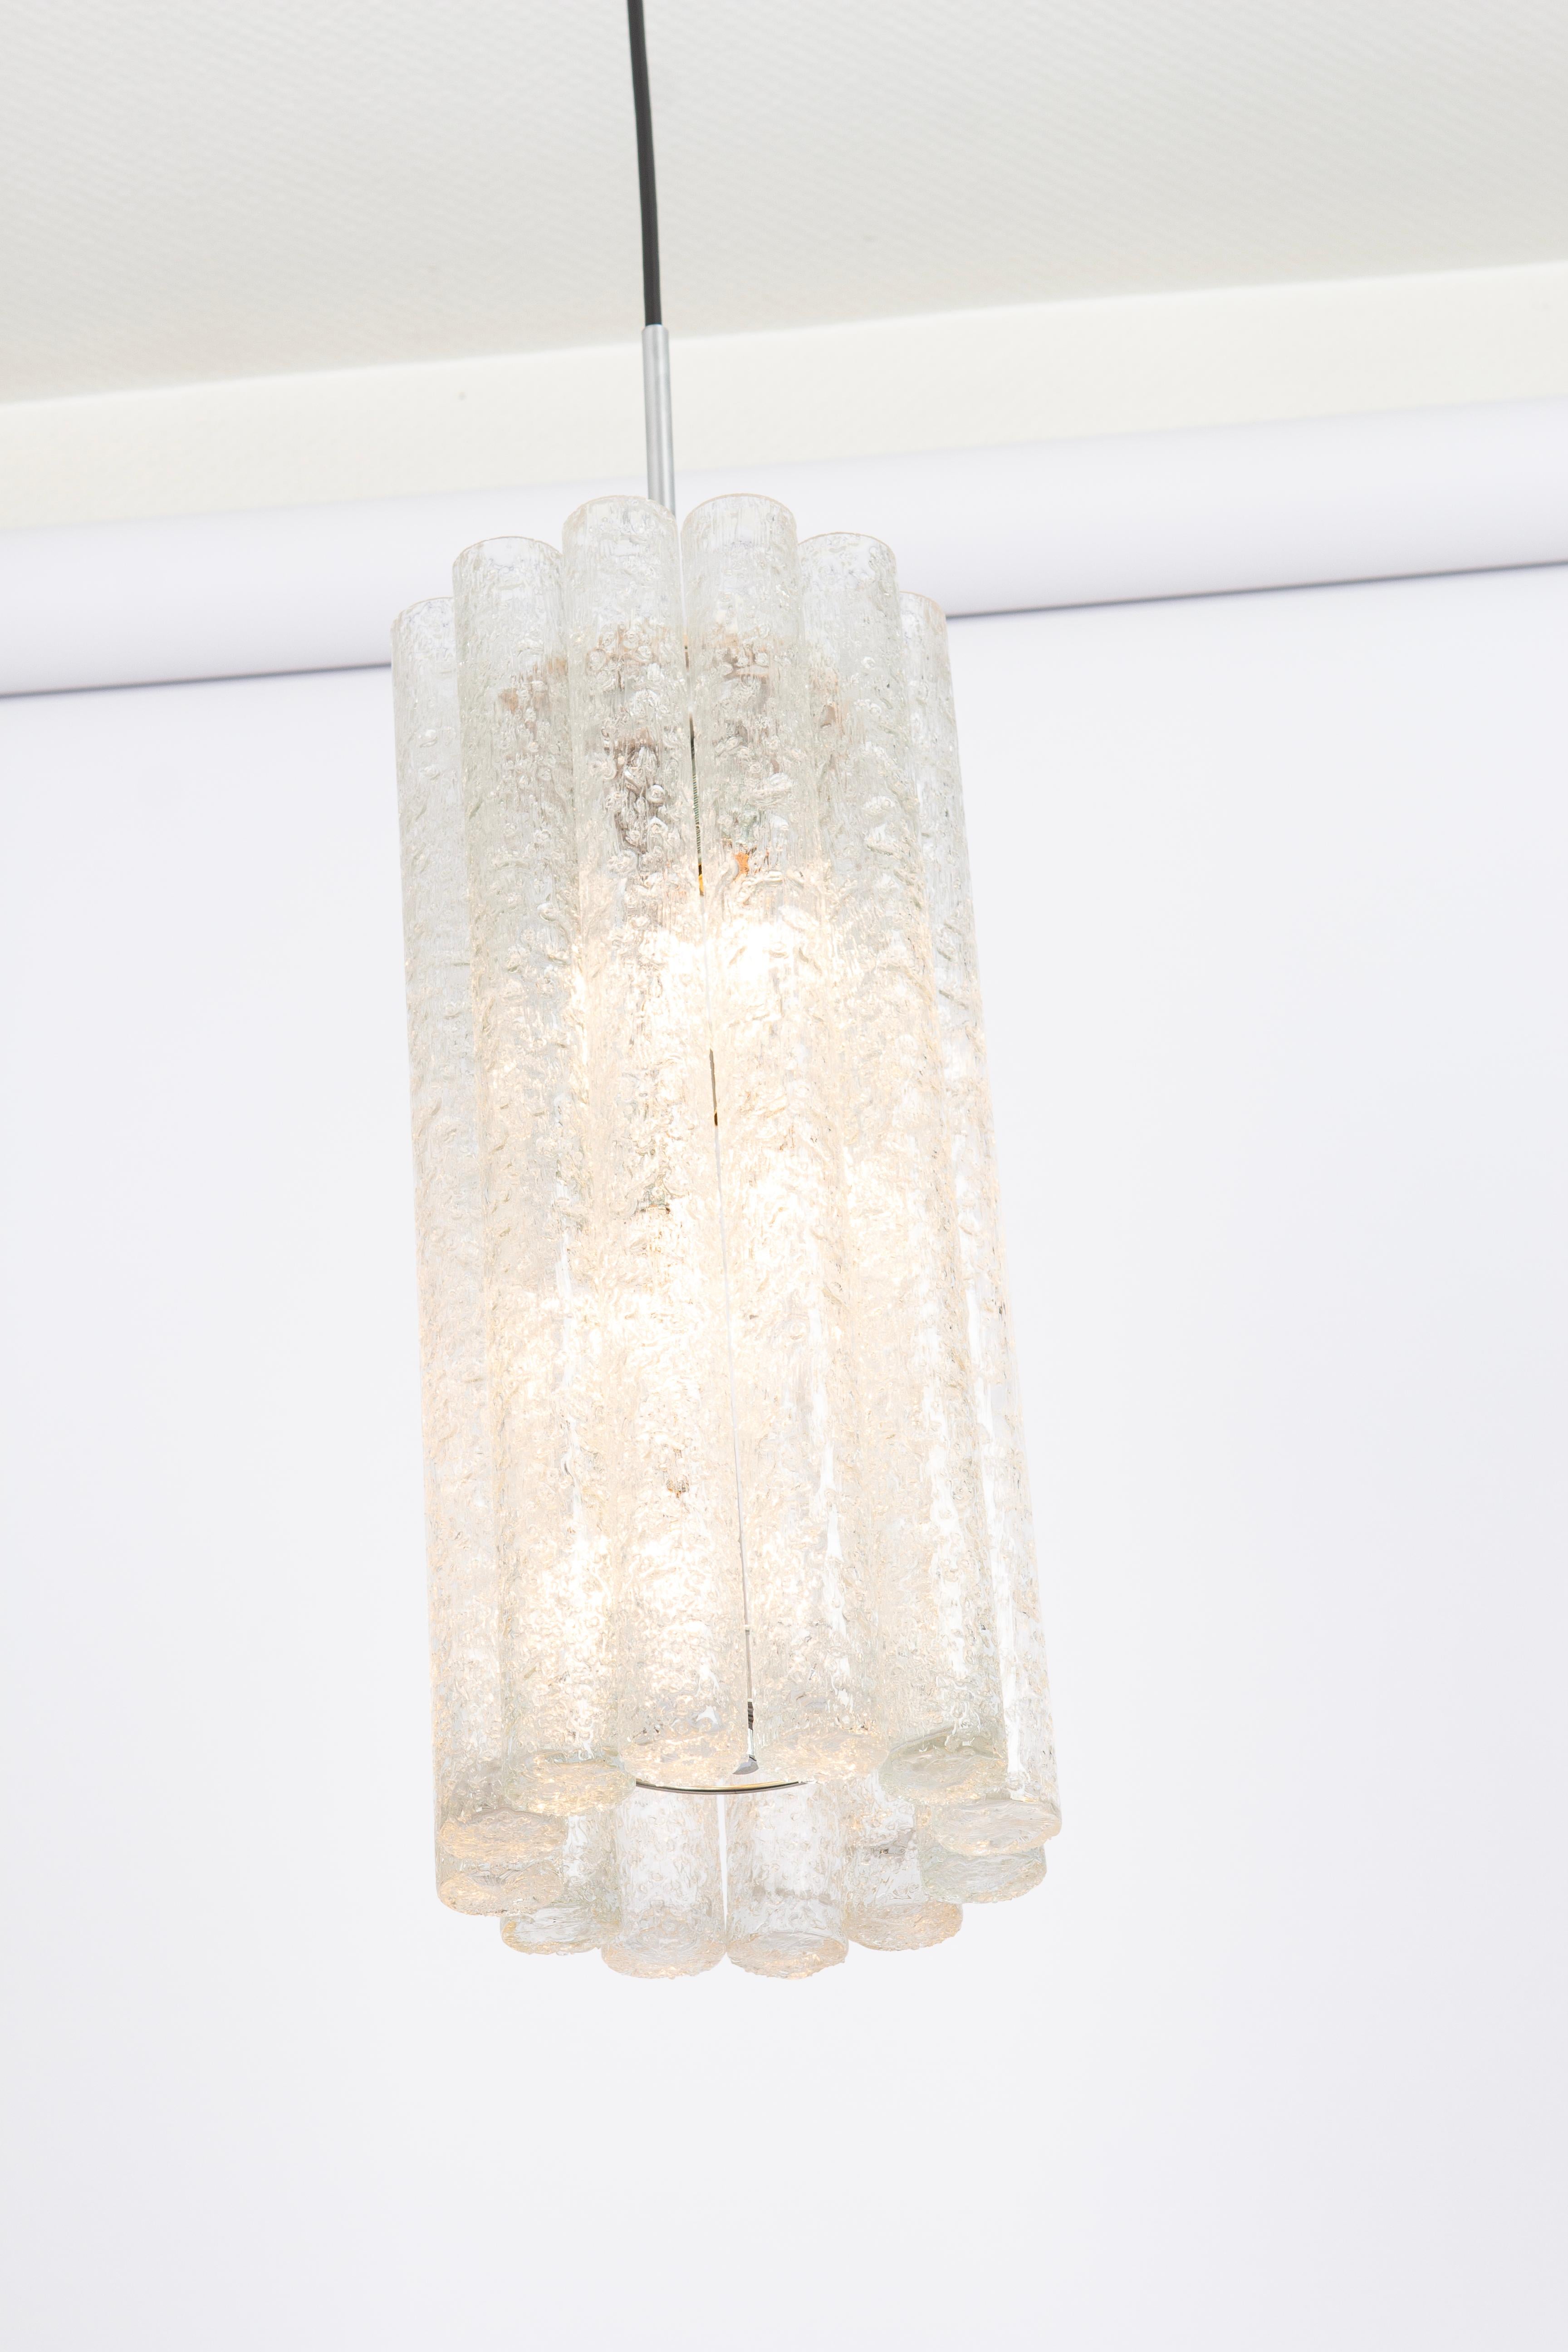 1 of 6 Large Murano Tubes Pendant Lights by Doria, 1970s For Sale 1